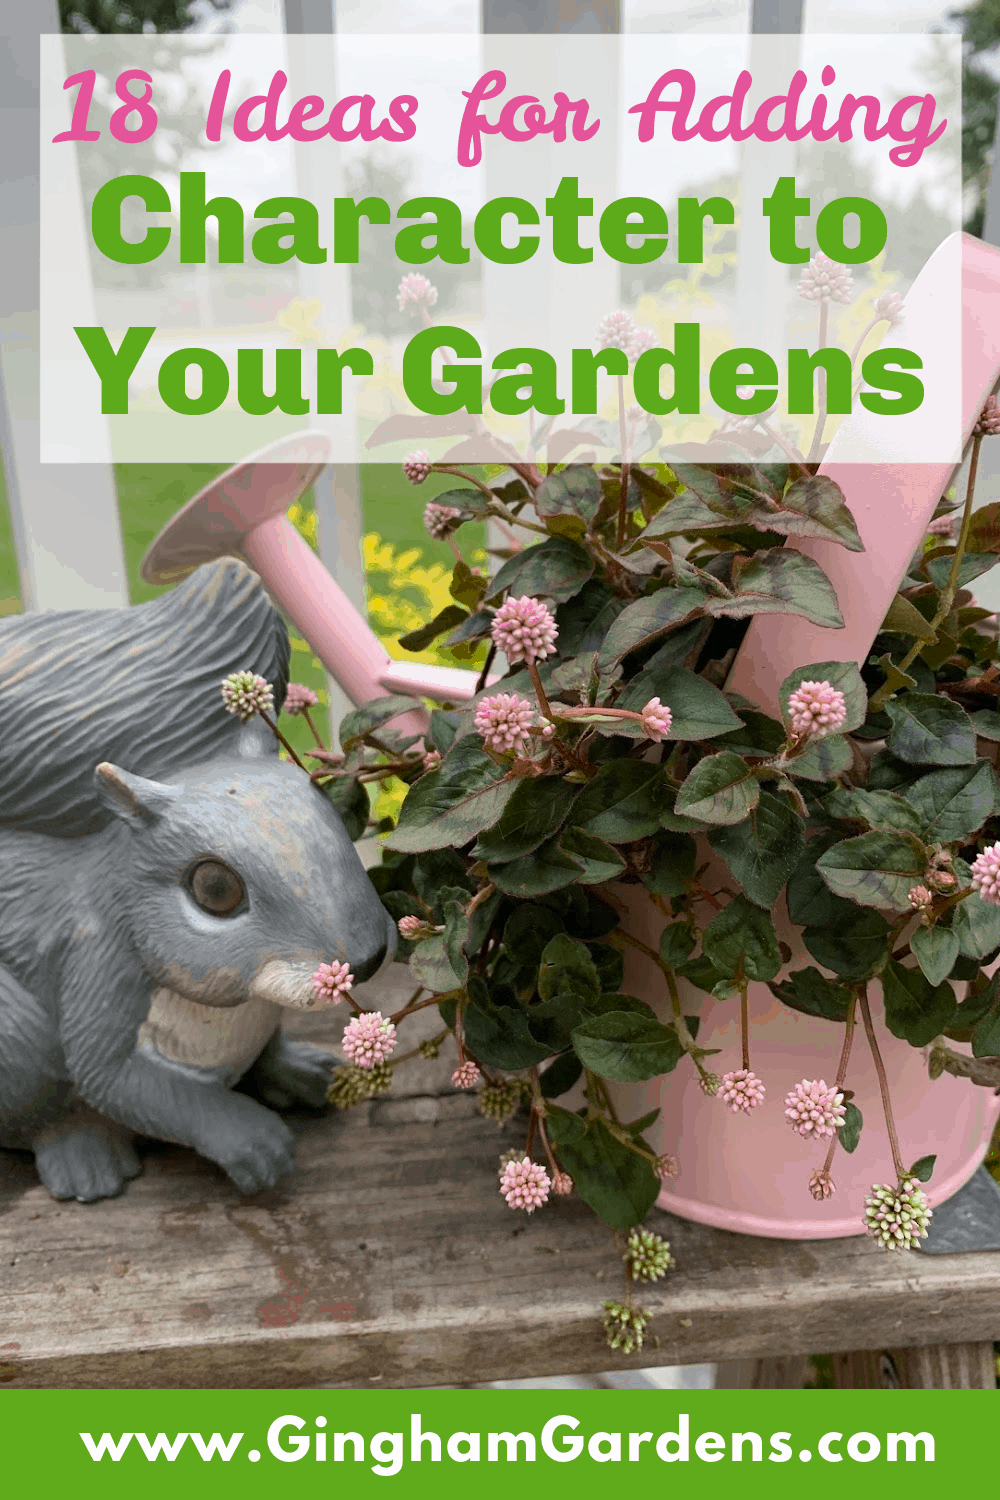 Image of Garden Decor with Text Overlay - 18 Ideas for Adding Character to Your Gardens